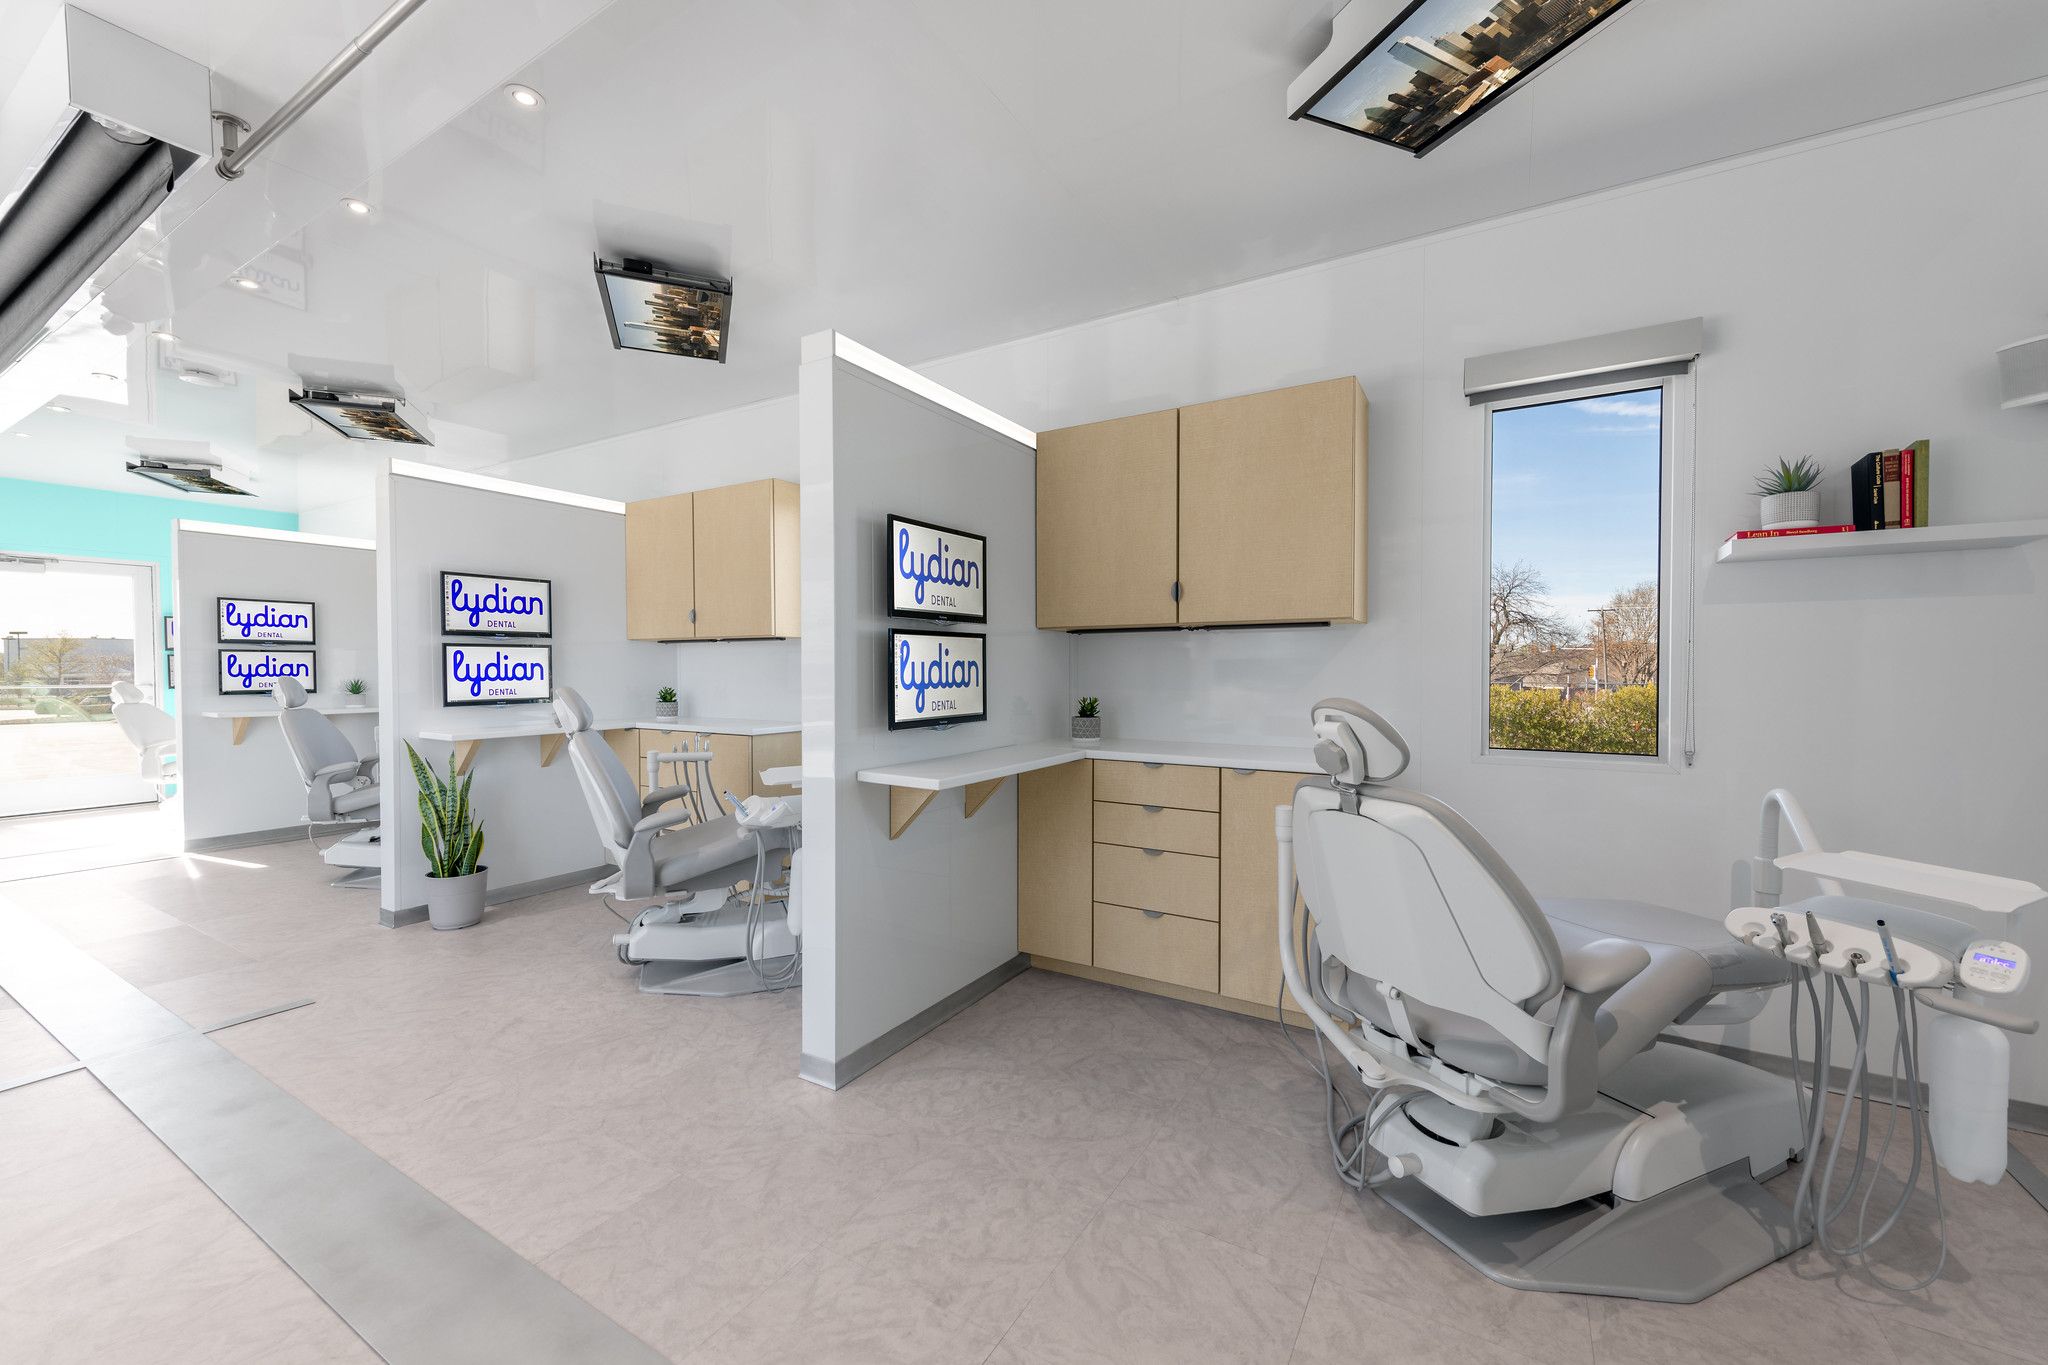 Lydian Dental Mobile Clinic Patient Room 2